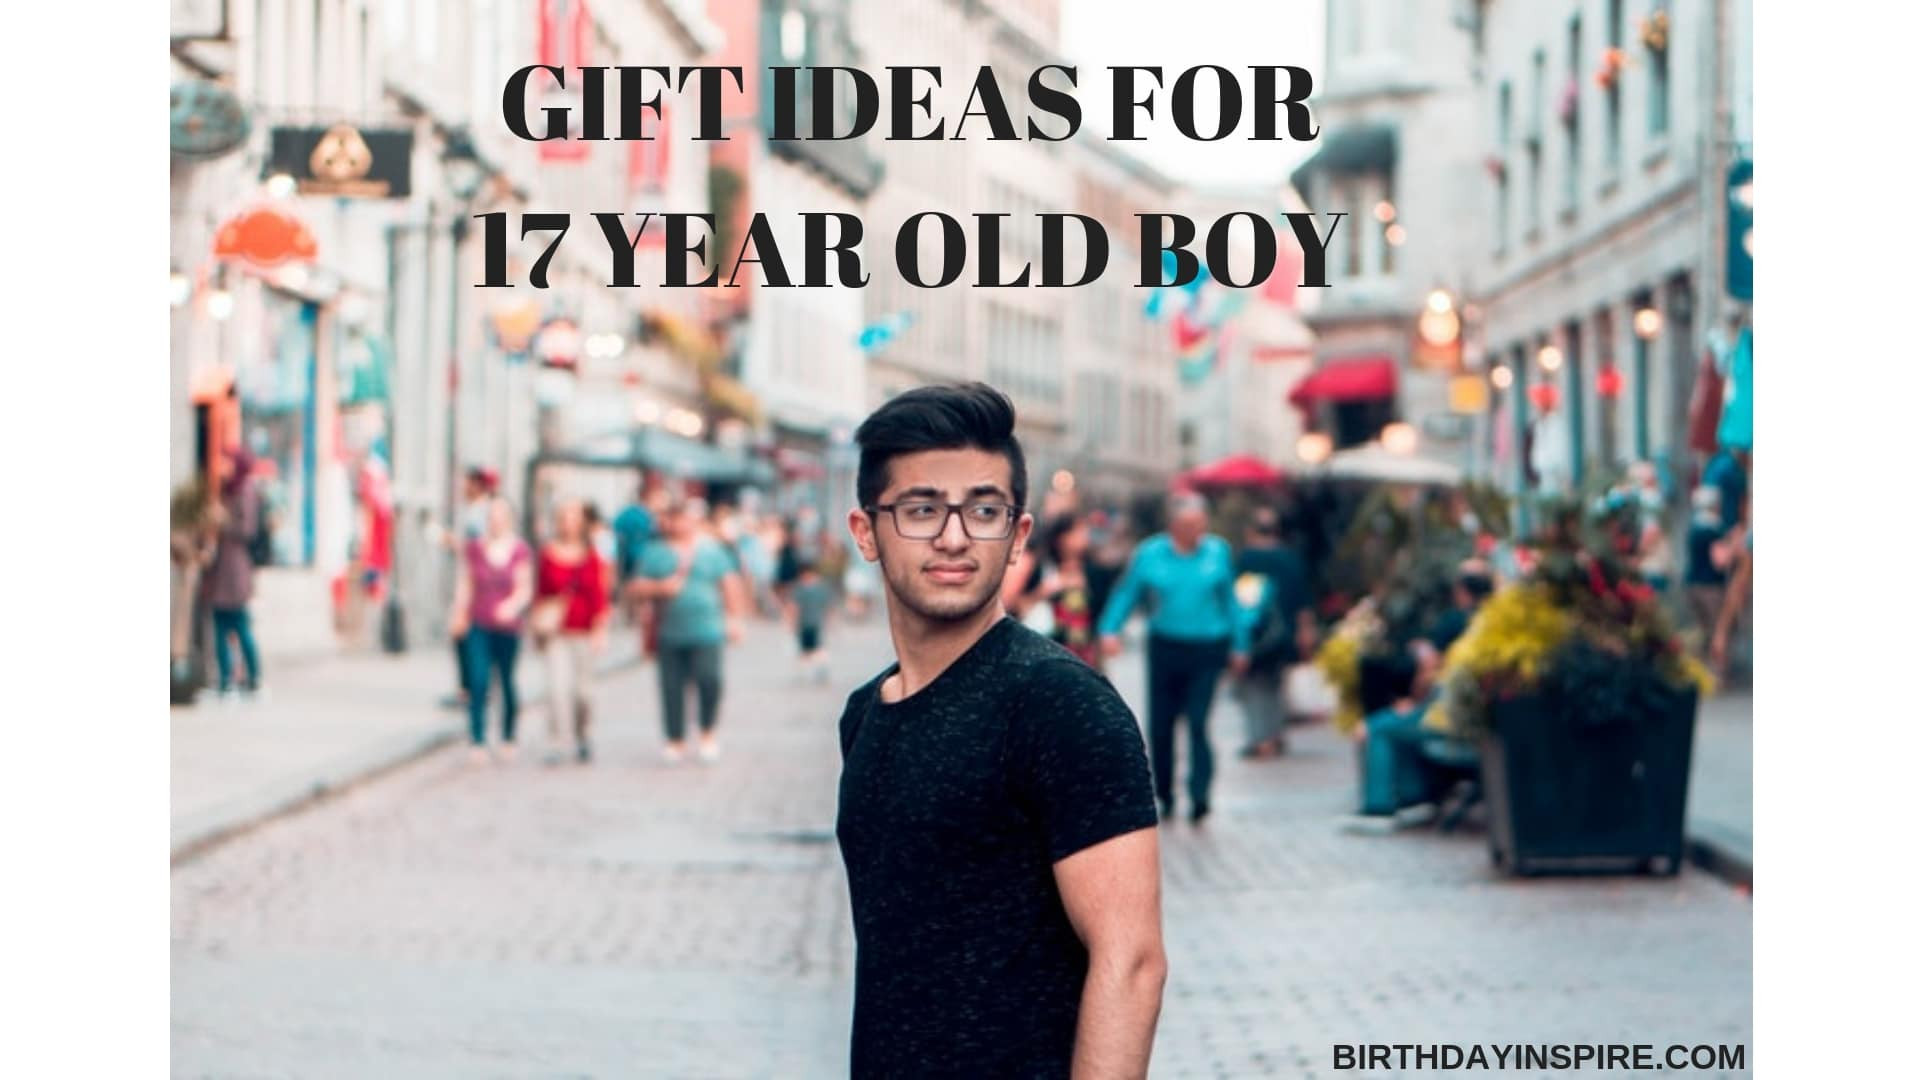 Gift Ideas For 17 Year Old Boys
 33 Wonderful Gift Ideas For 17 Year Old Boy